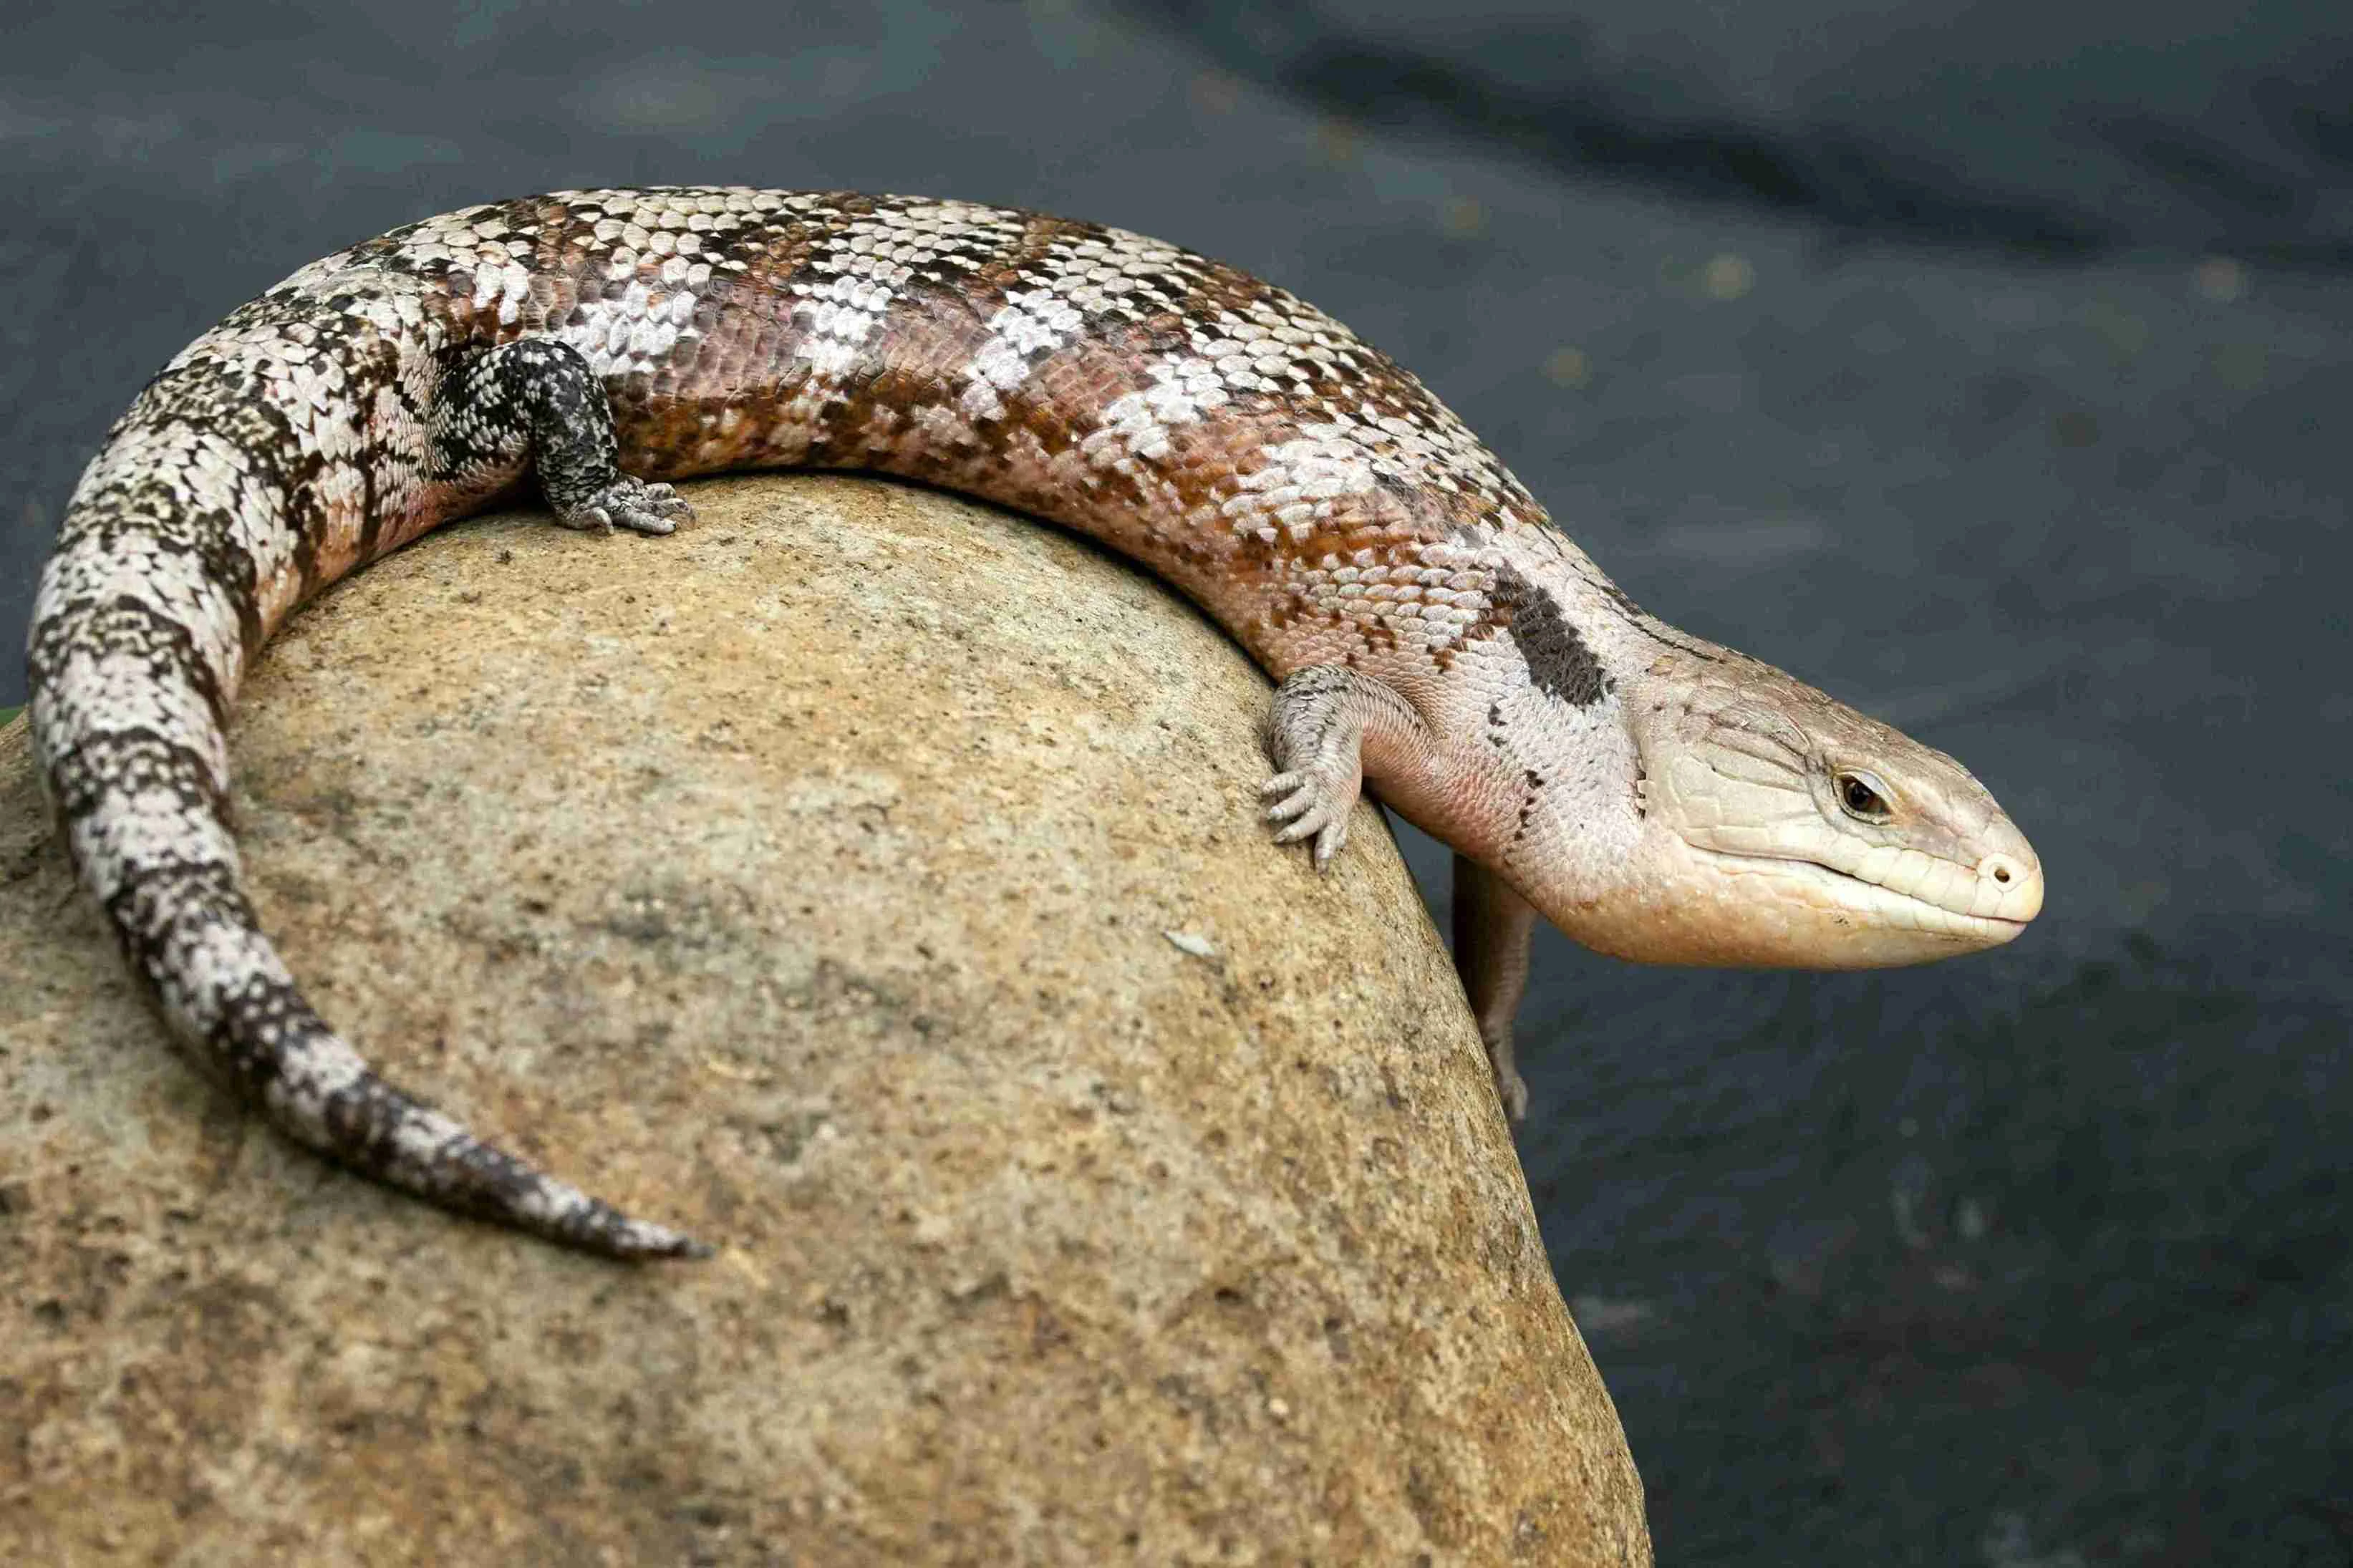 A Skink lizard perched on a rock.